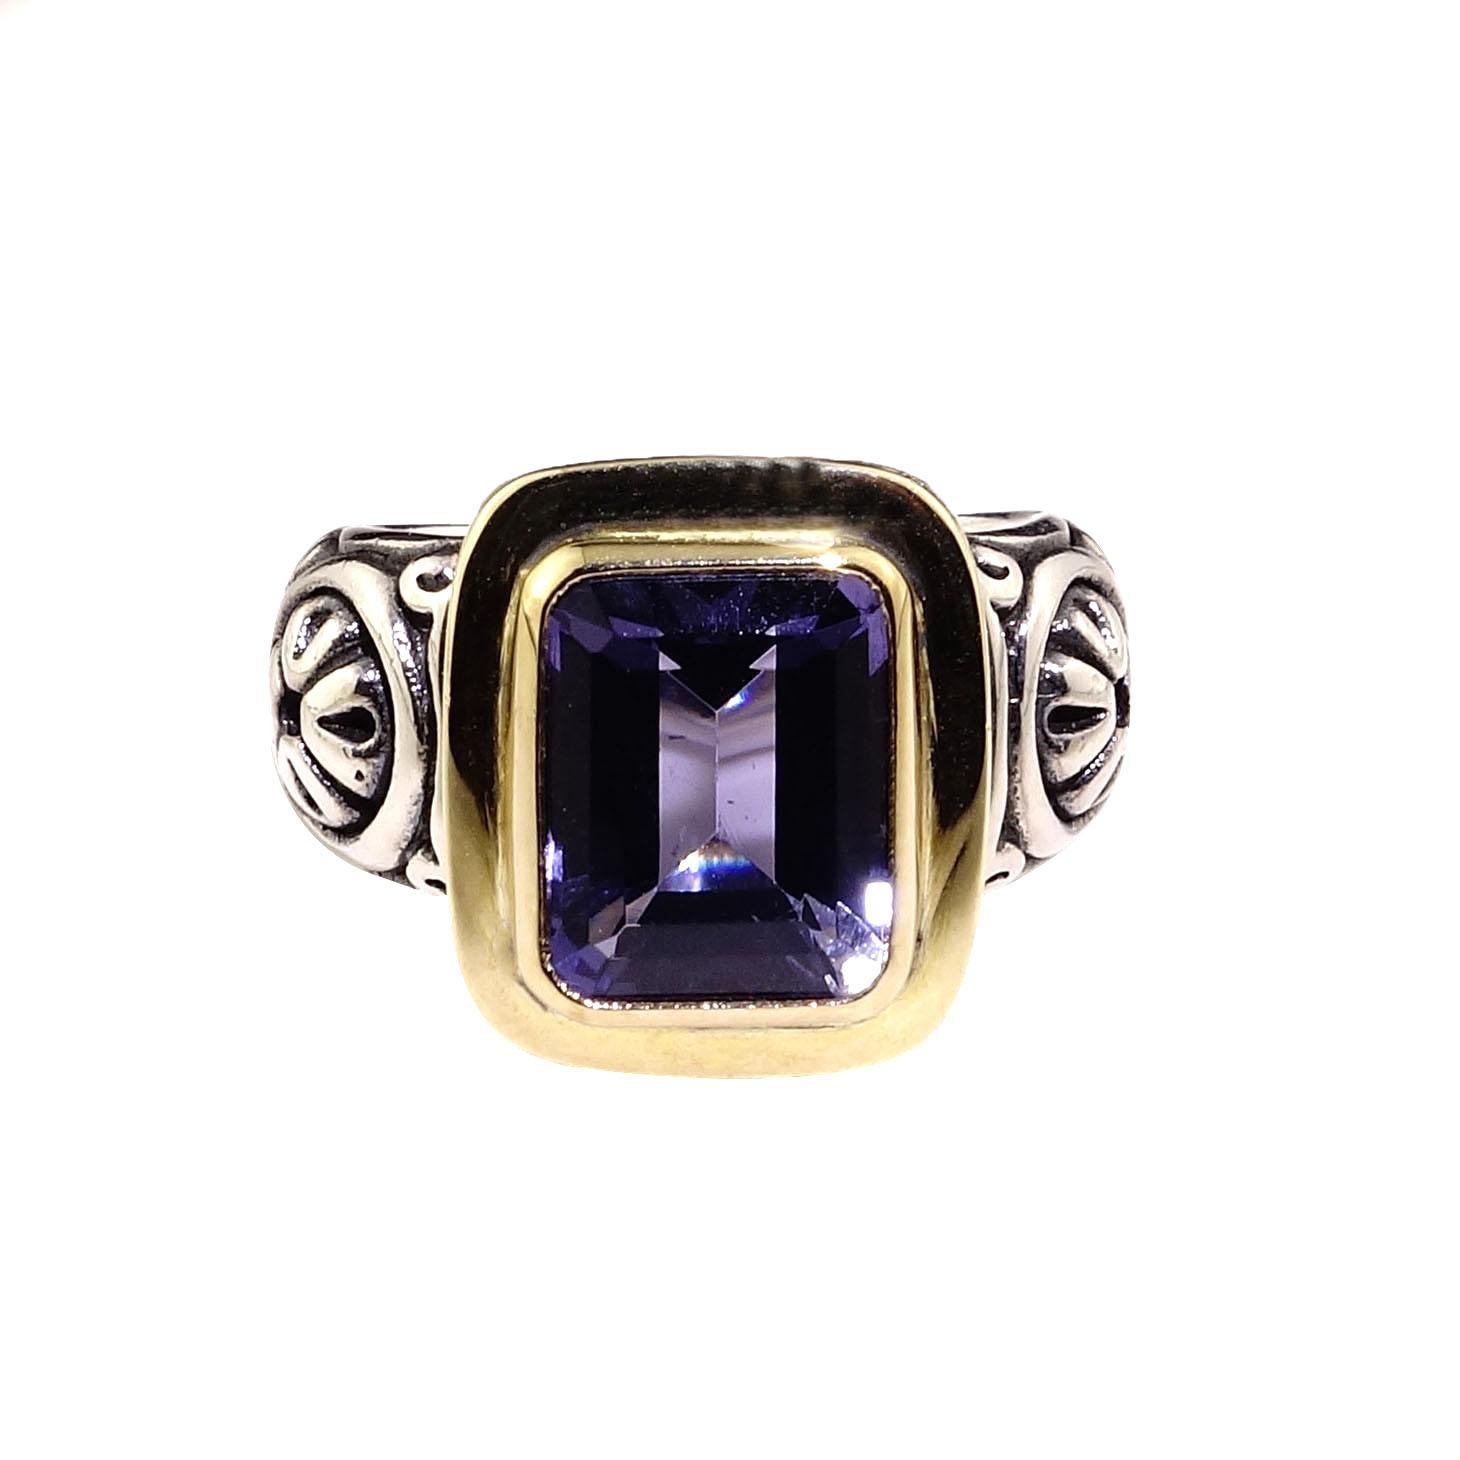 Stunning Sterling Silver ring showcasing an emerald cut blue Iolite bezel set in 18K yellow gold. This is Steven Battelle ring featuring all of his attention to detail and comfort.  The Sterling Silver shank and head are etched and beautifully